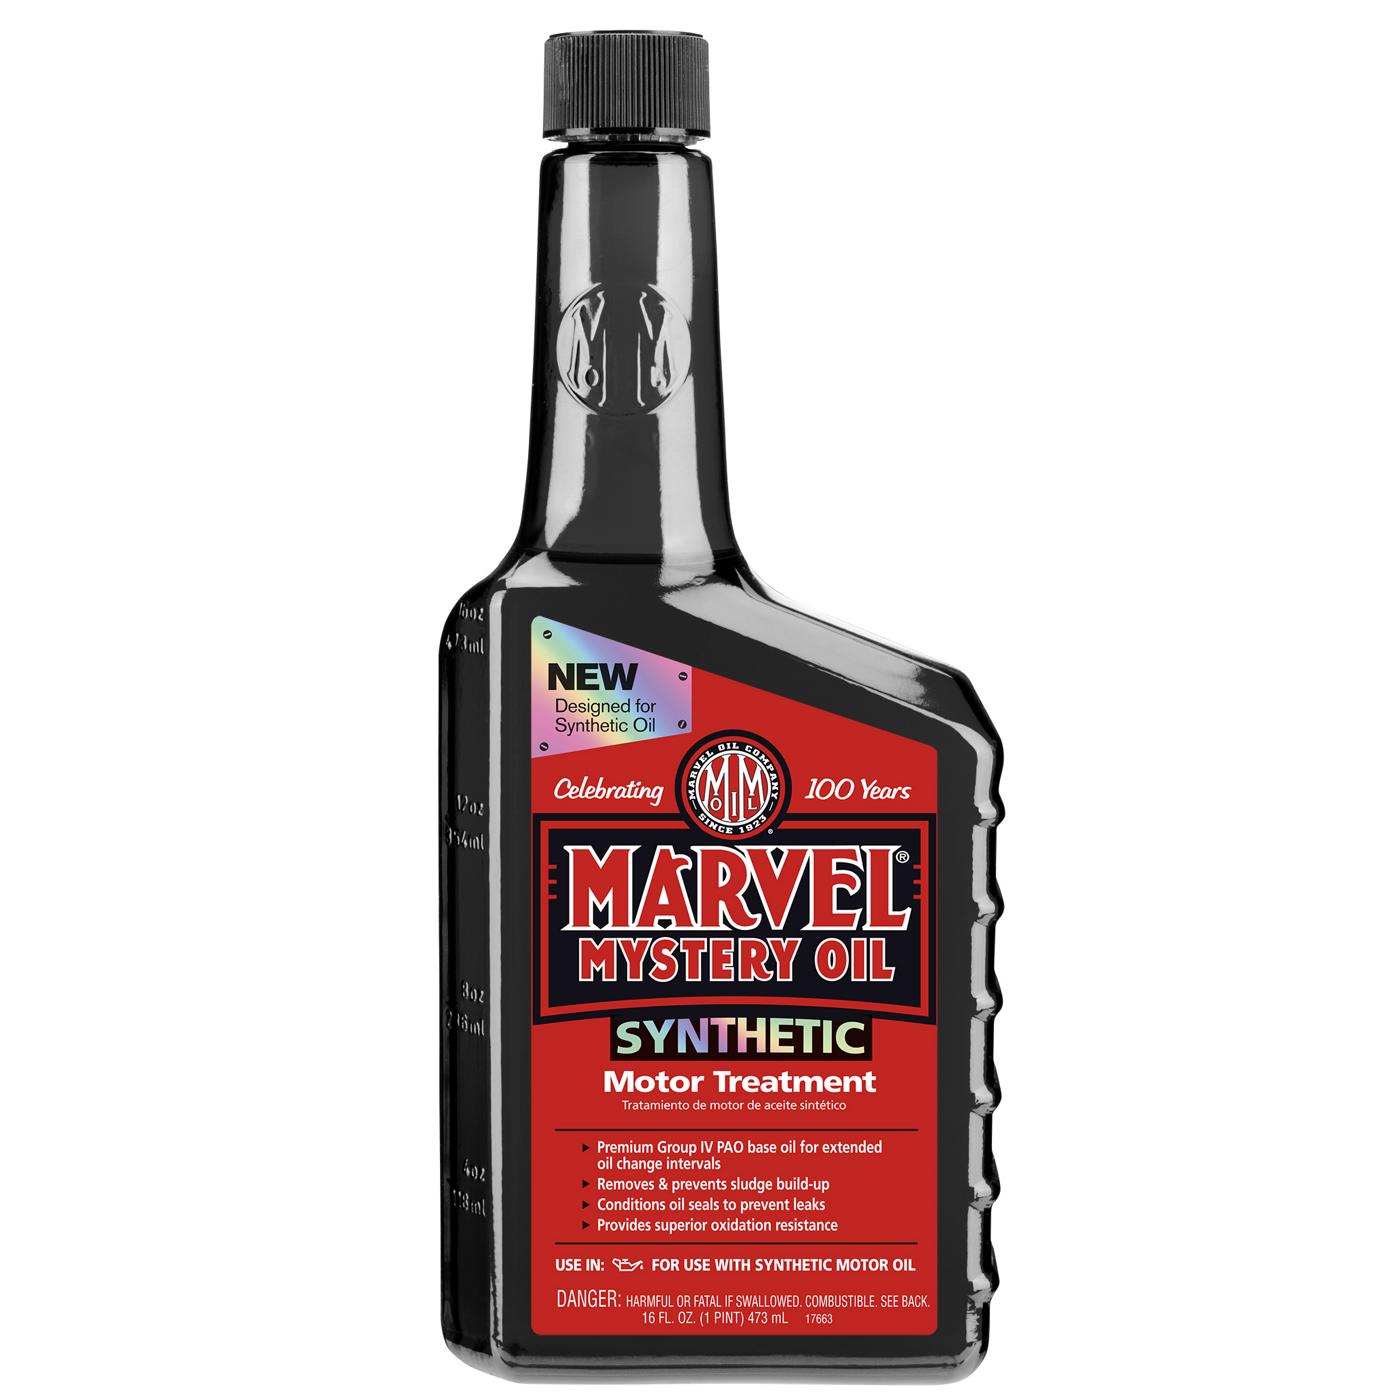 Marvel Mystery Oil Synthetic Motor Treatment; image 1 of 2